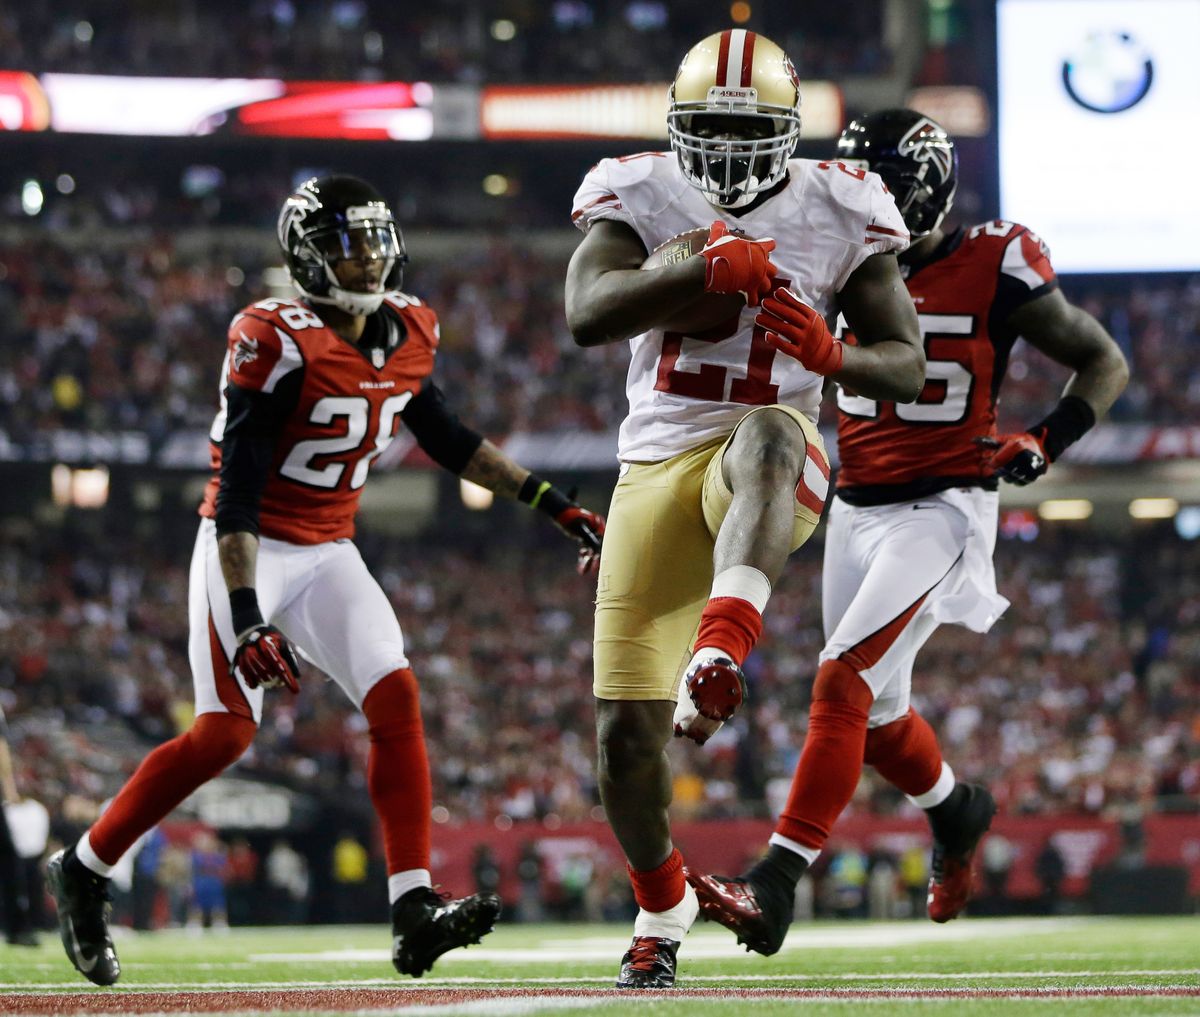 San Francisco’s Frank Gore runs into the end zone for a 9-yard touchdown in the fourth quarter that provided the winning points. (Associated Press)